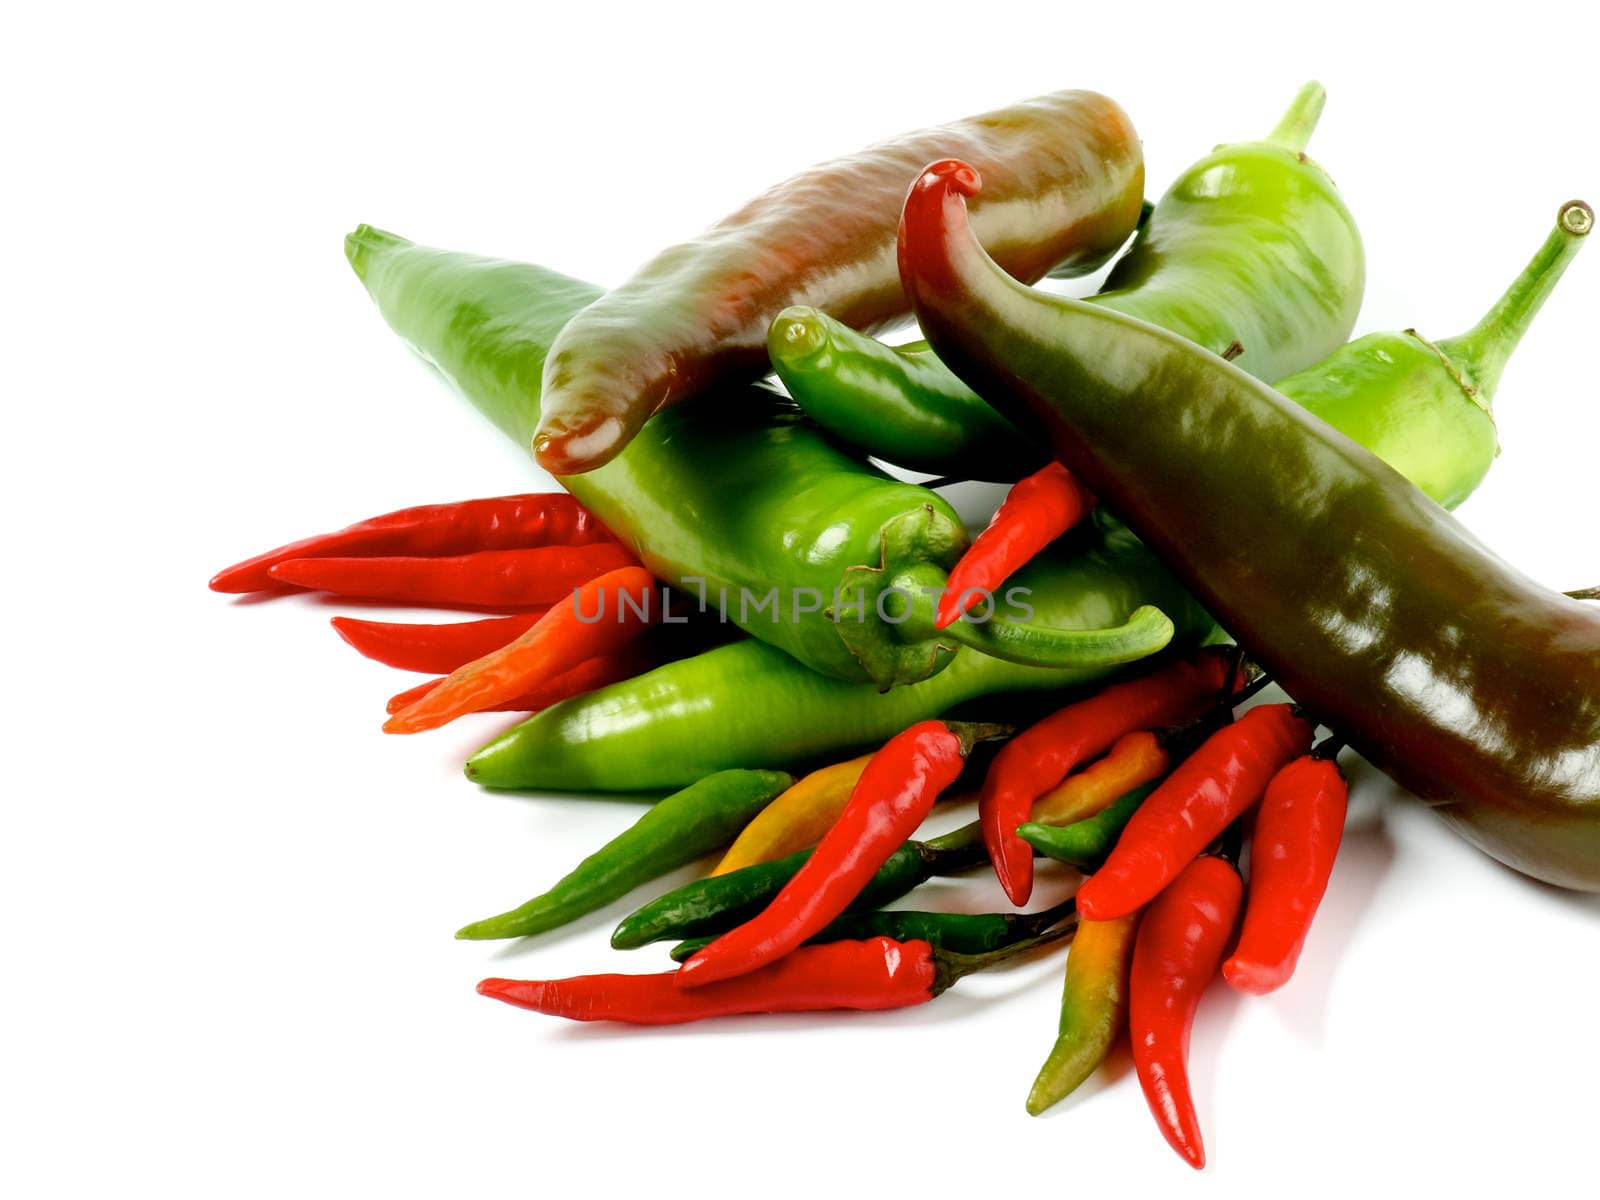 Arrangement of Big and Small Green and Red Chili Peppers closeup on White background